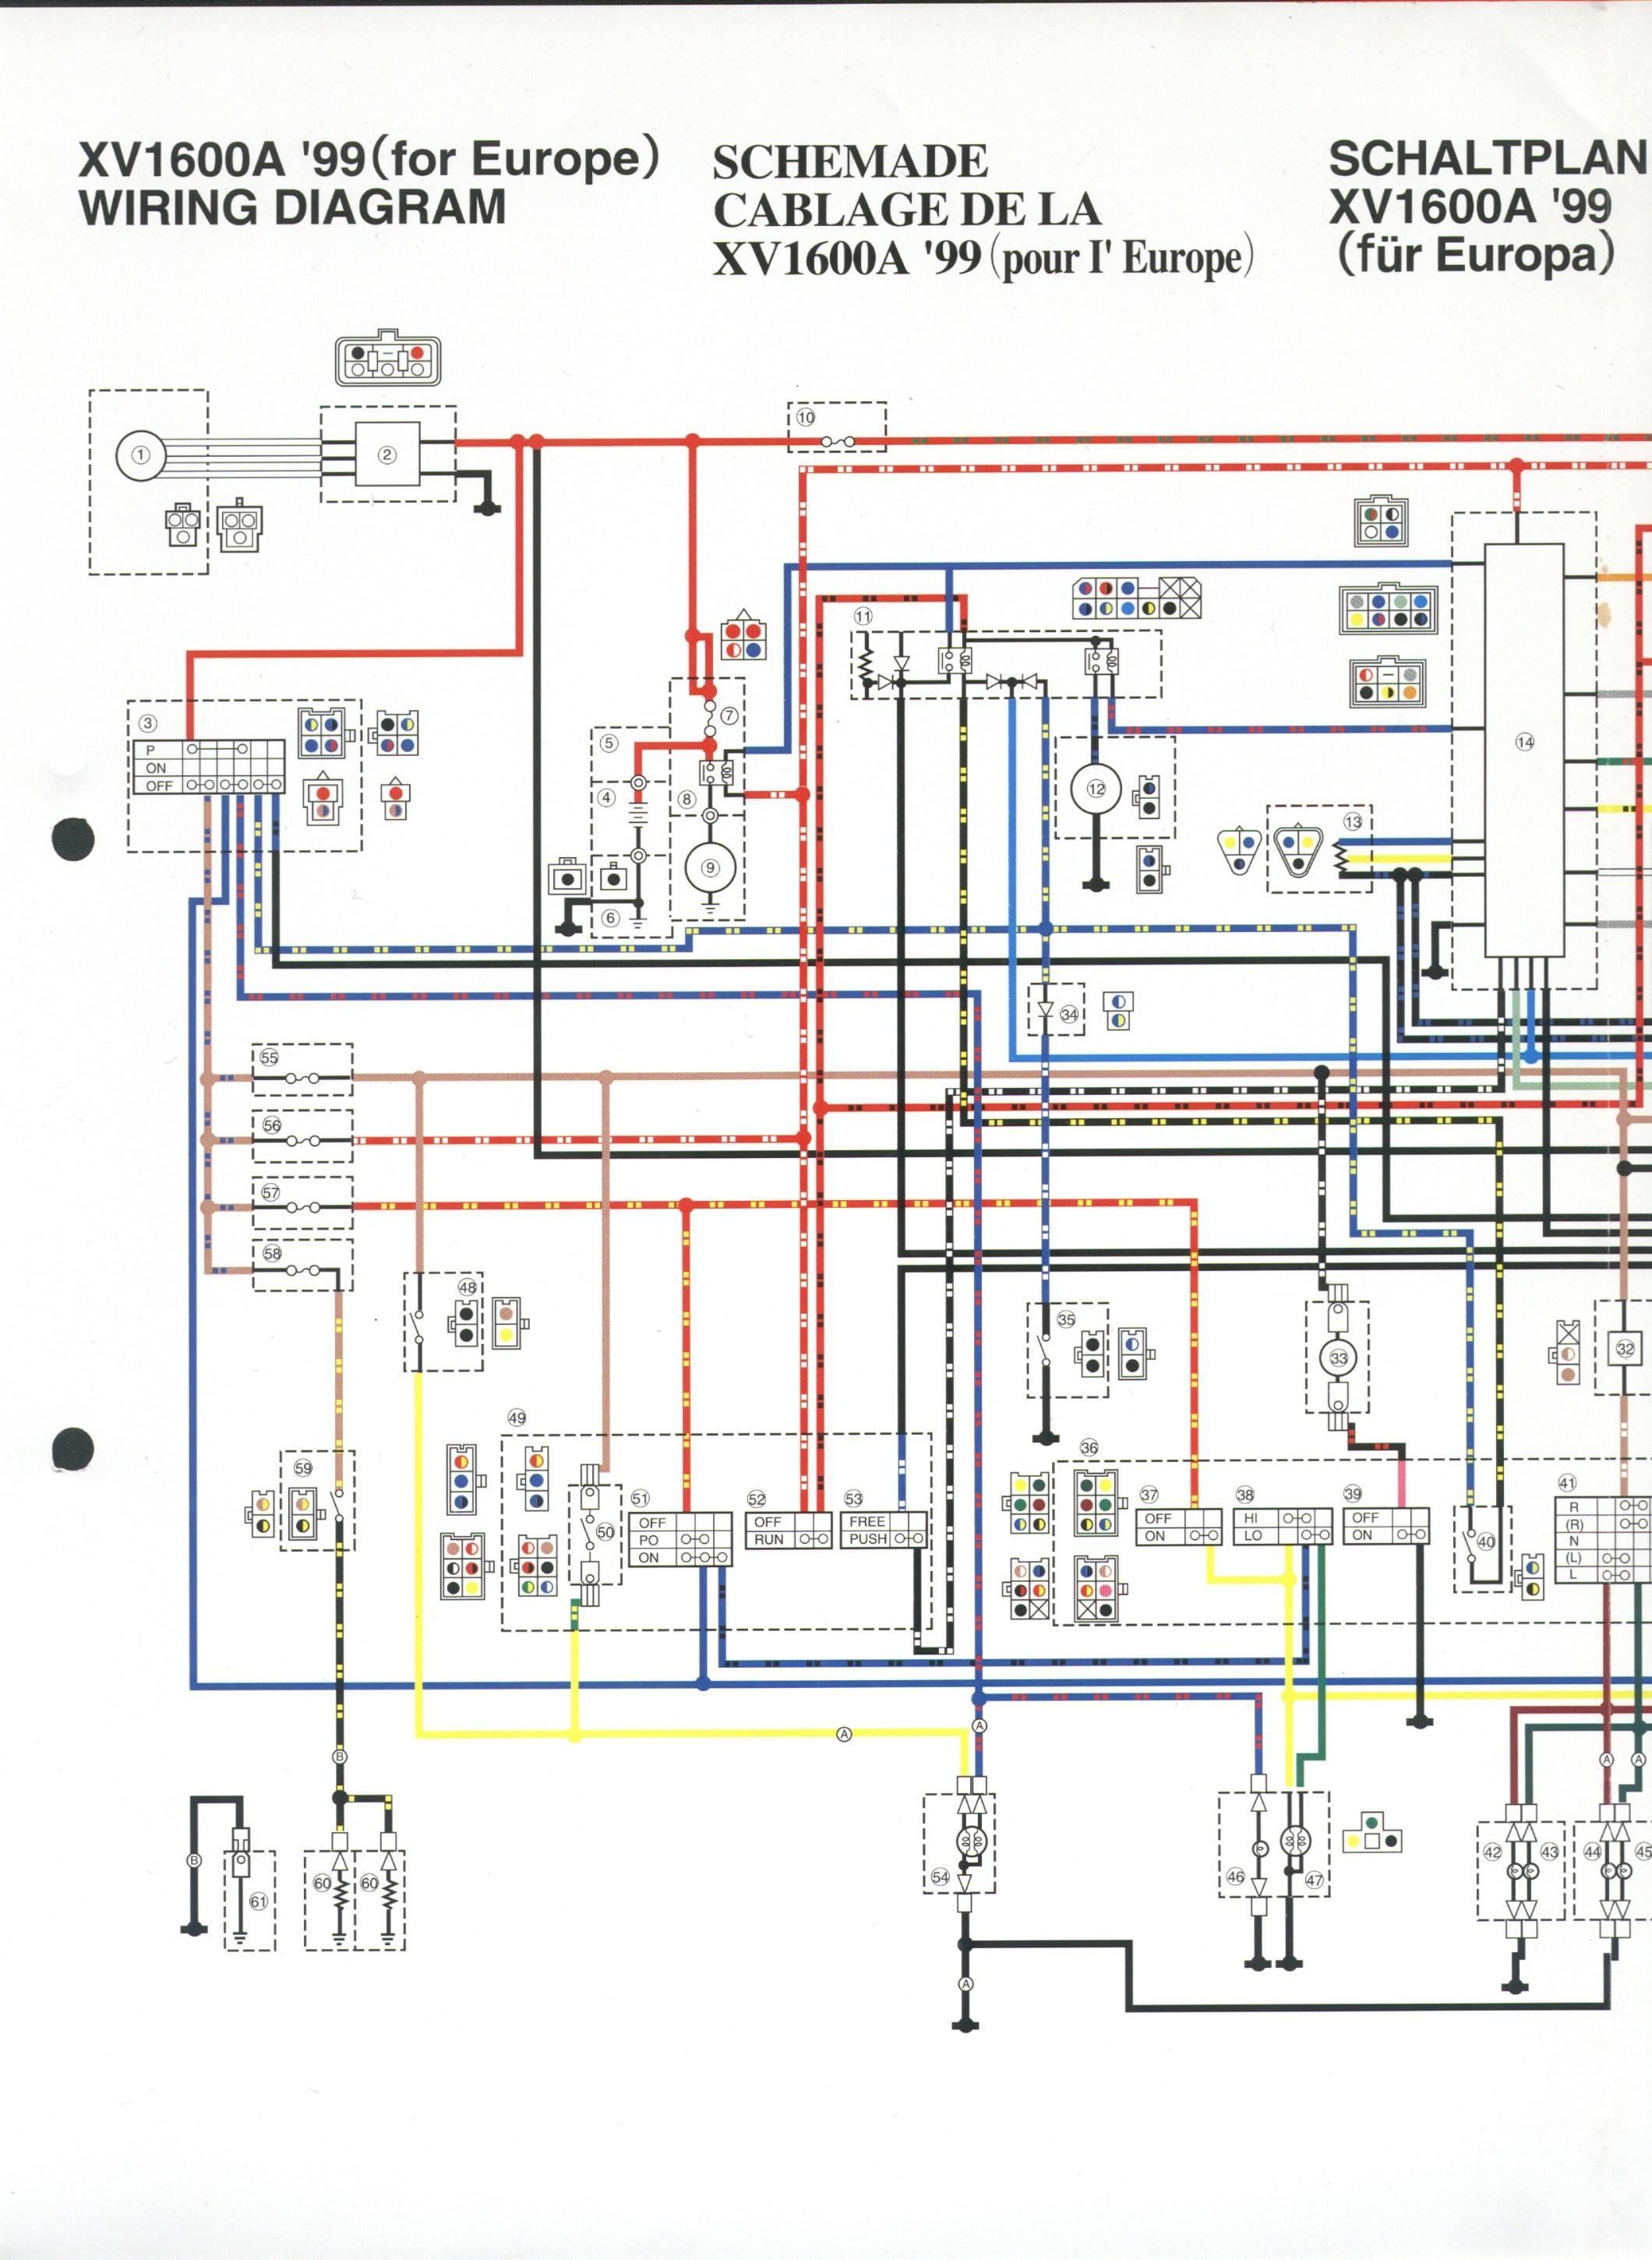 star delta wiring diagram for Android - APK Download